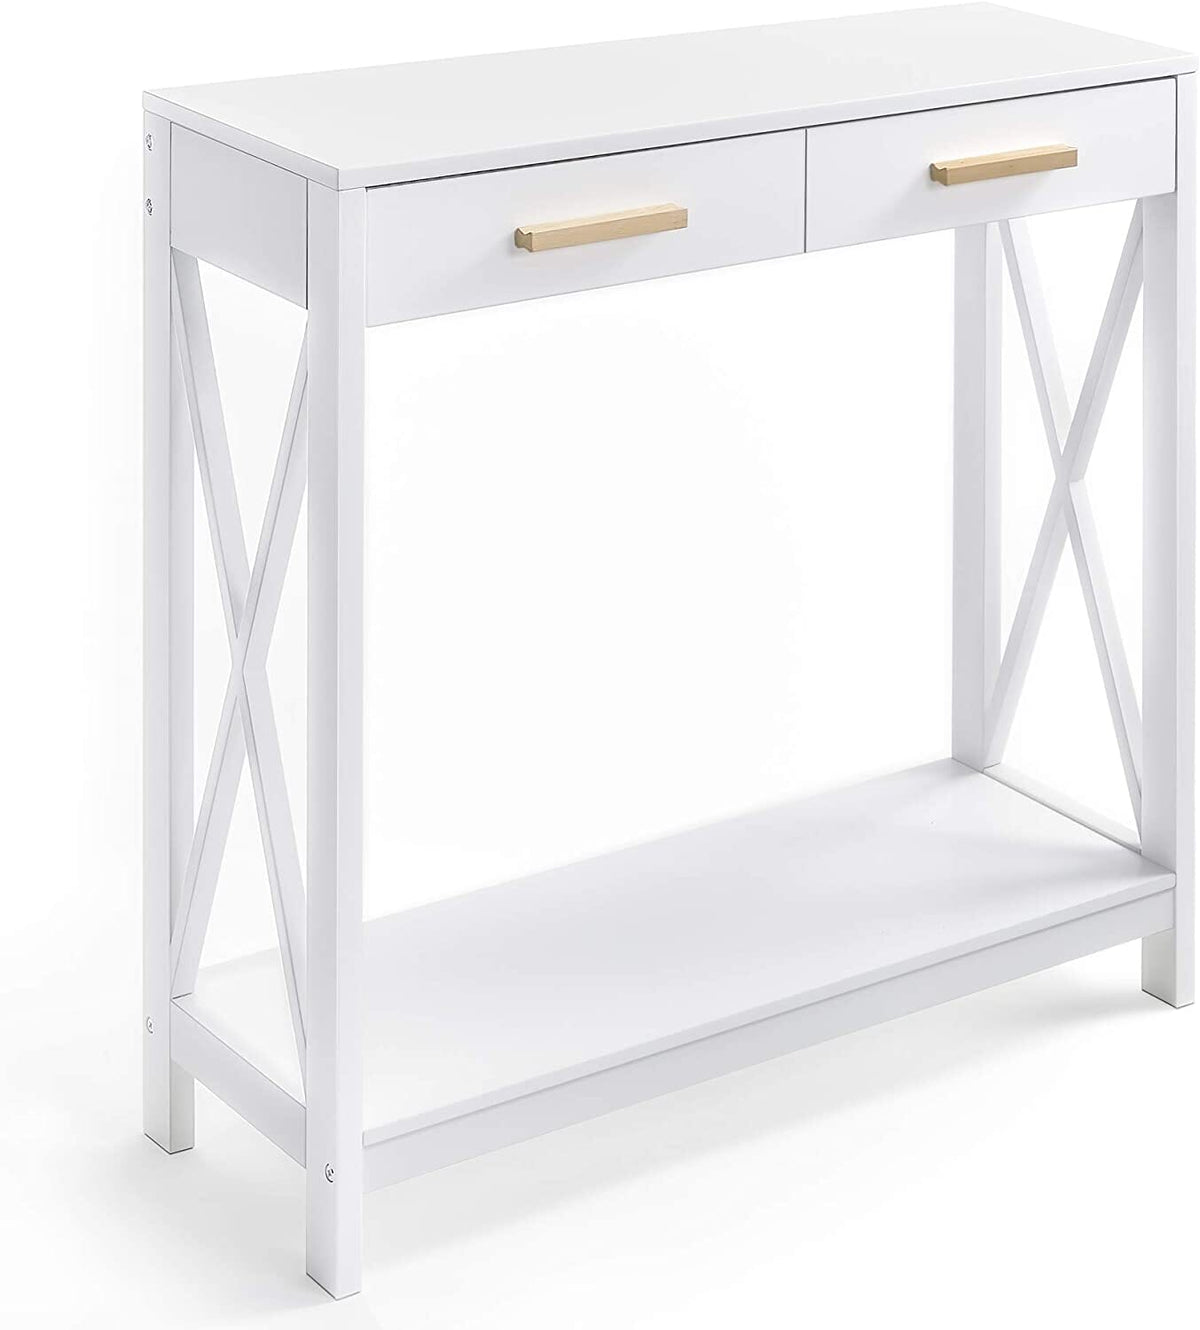 2-Tier White Compact Sofa and Console Table